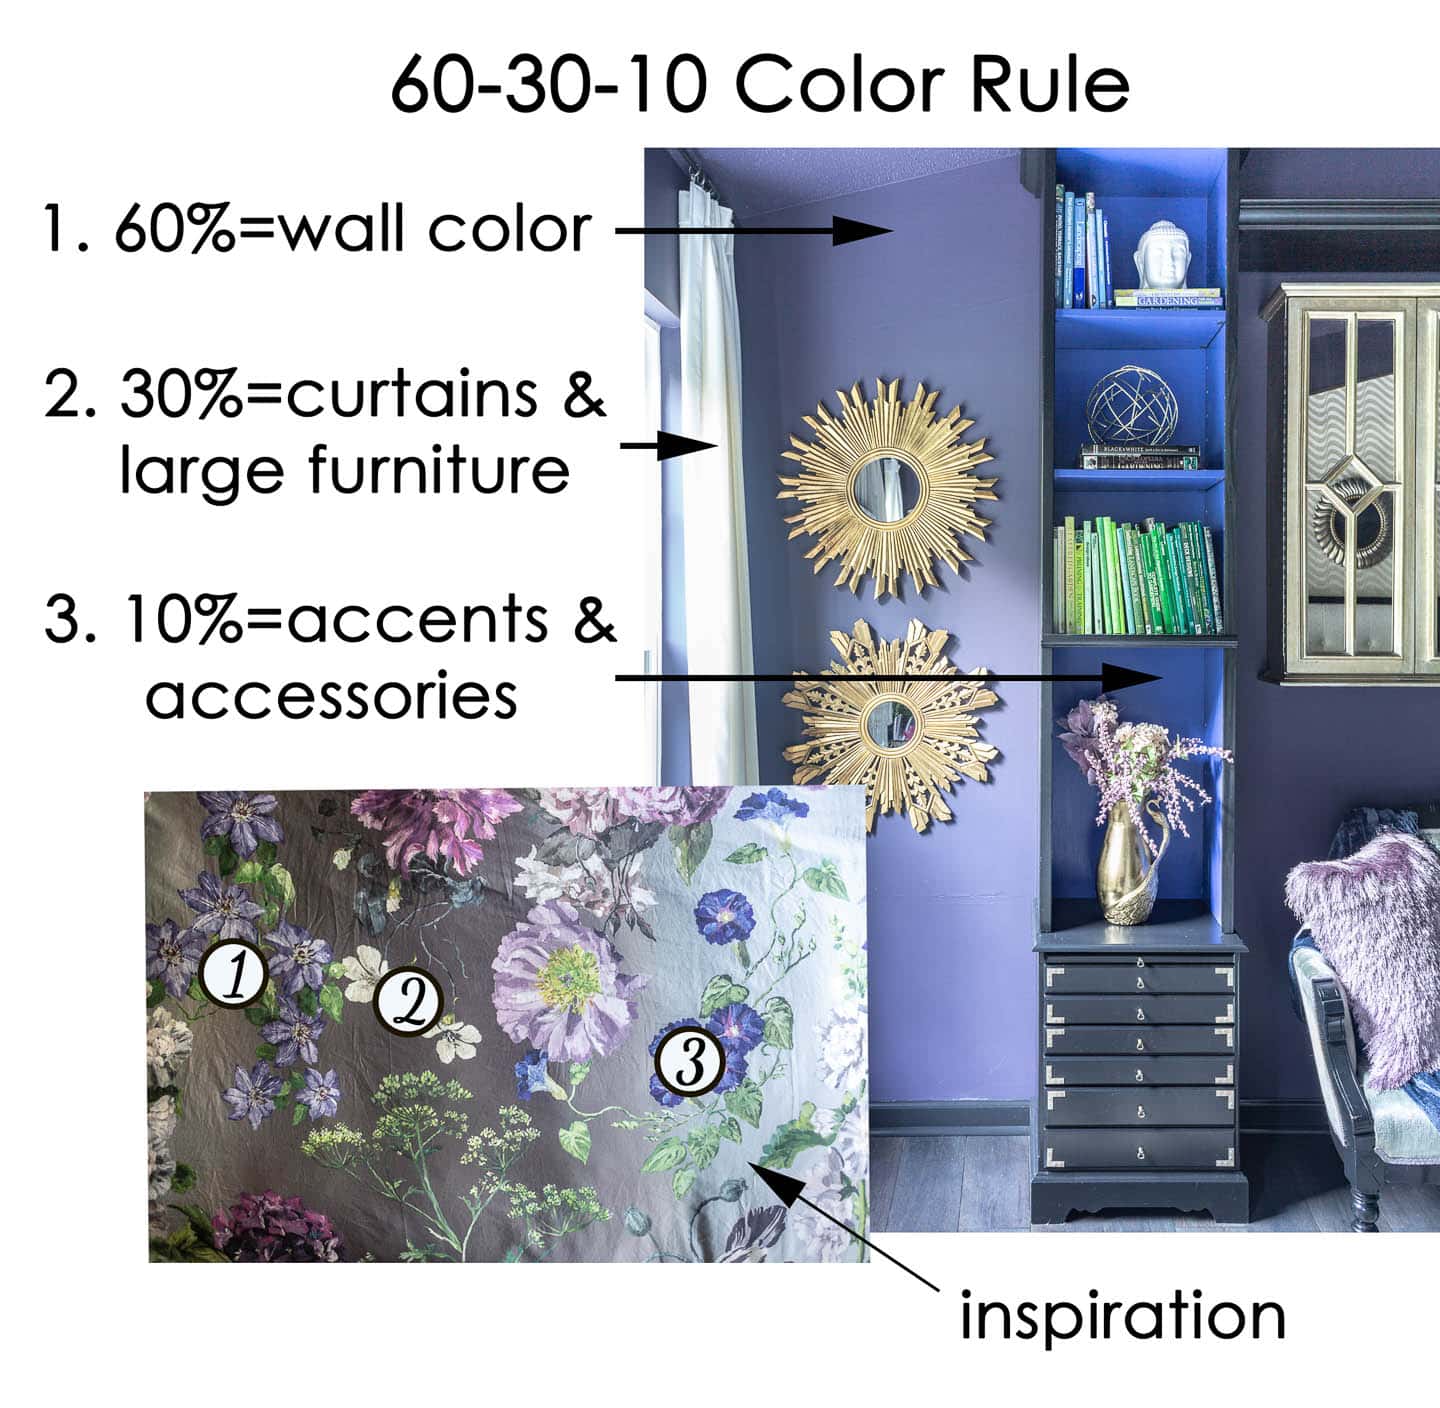 A diagram of the 60-30-10 color decorating rule